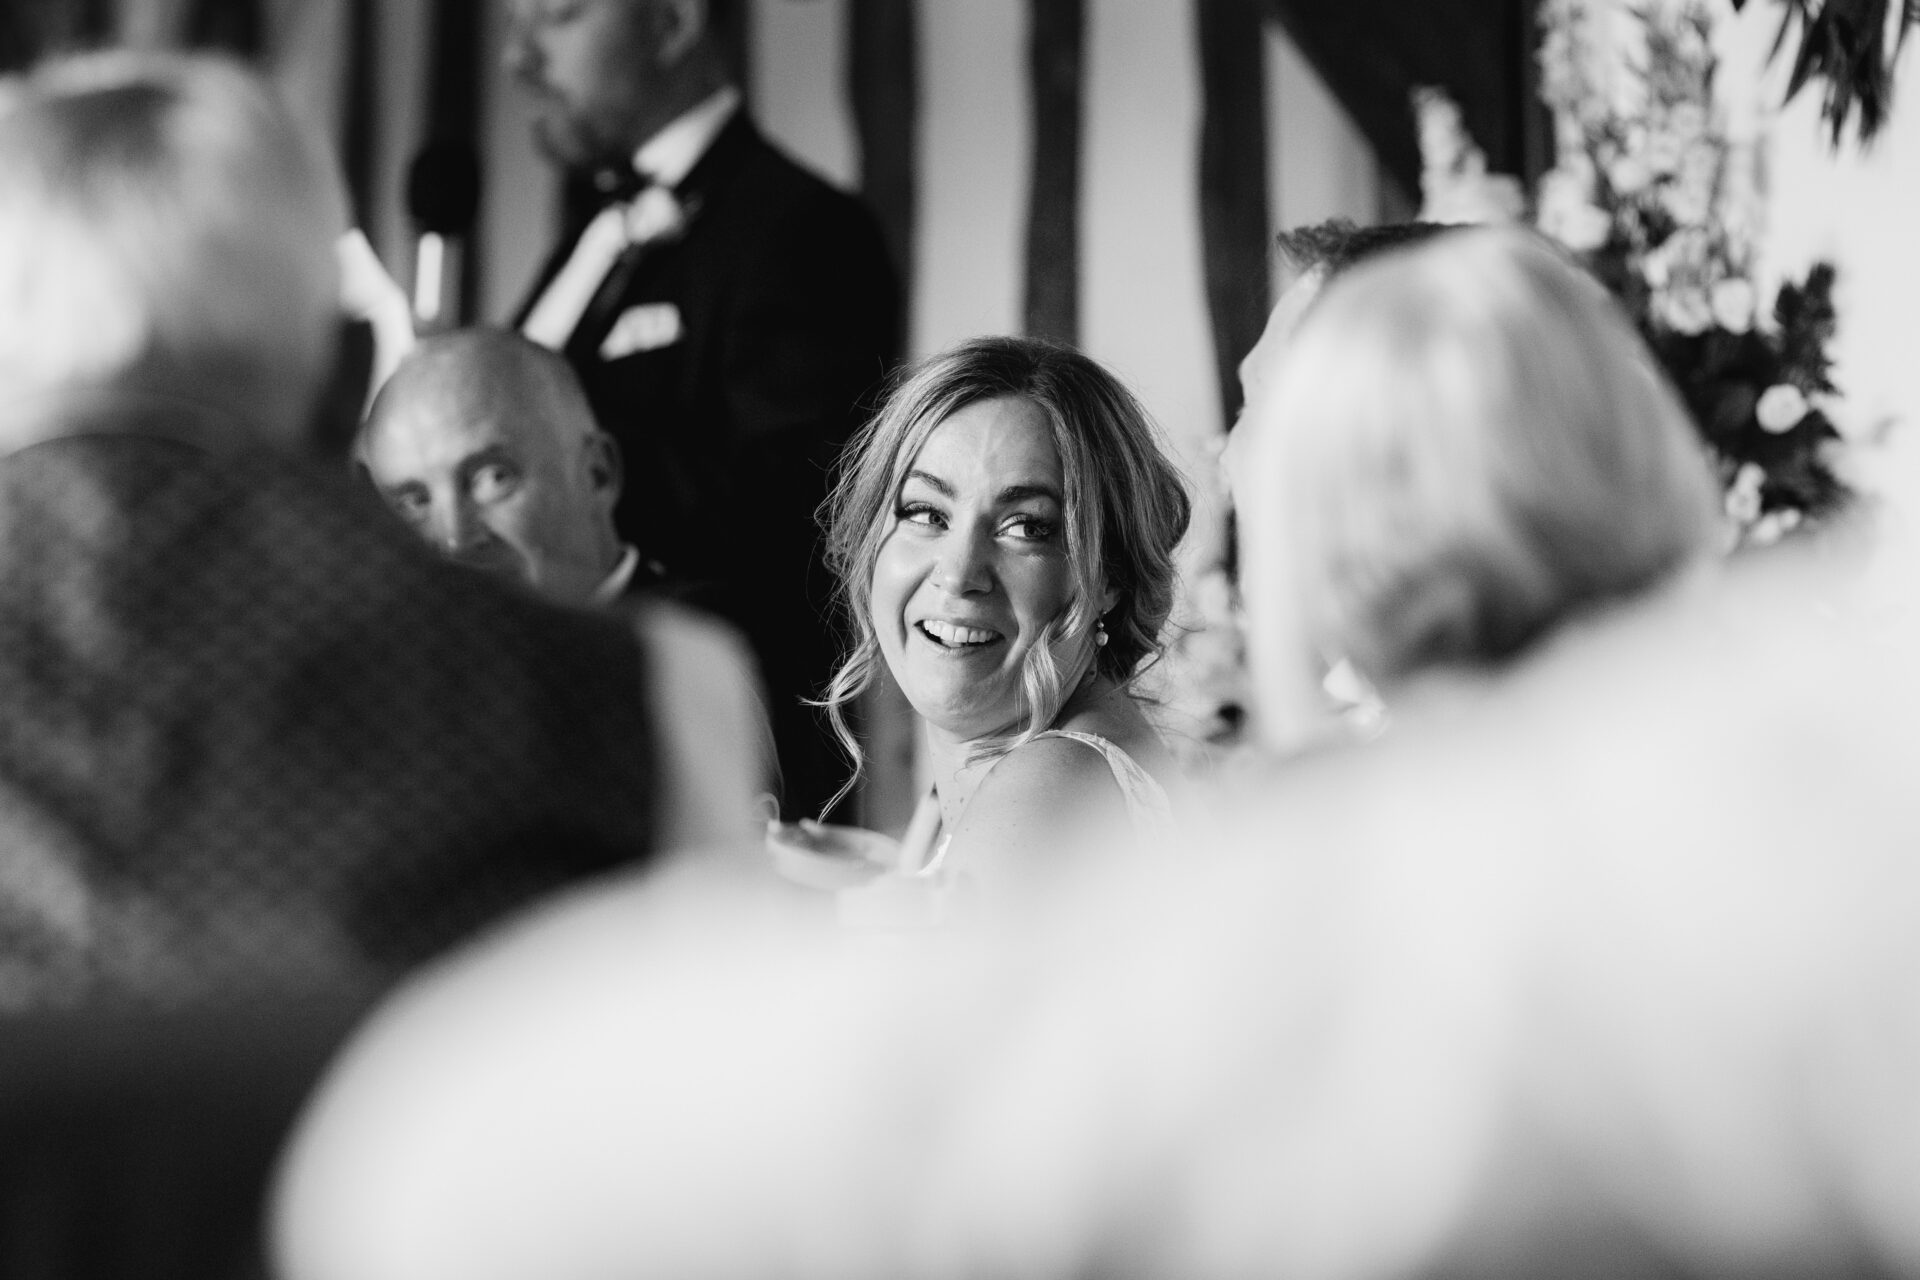 The bride listens to speeches at Old Luxters Barn wedding venue in Oxfordshire